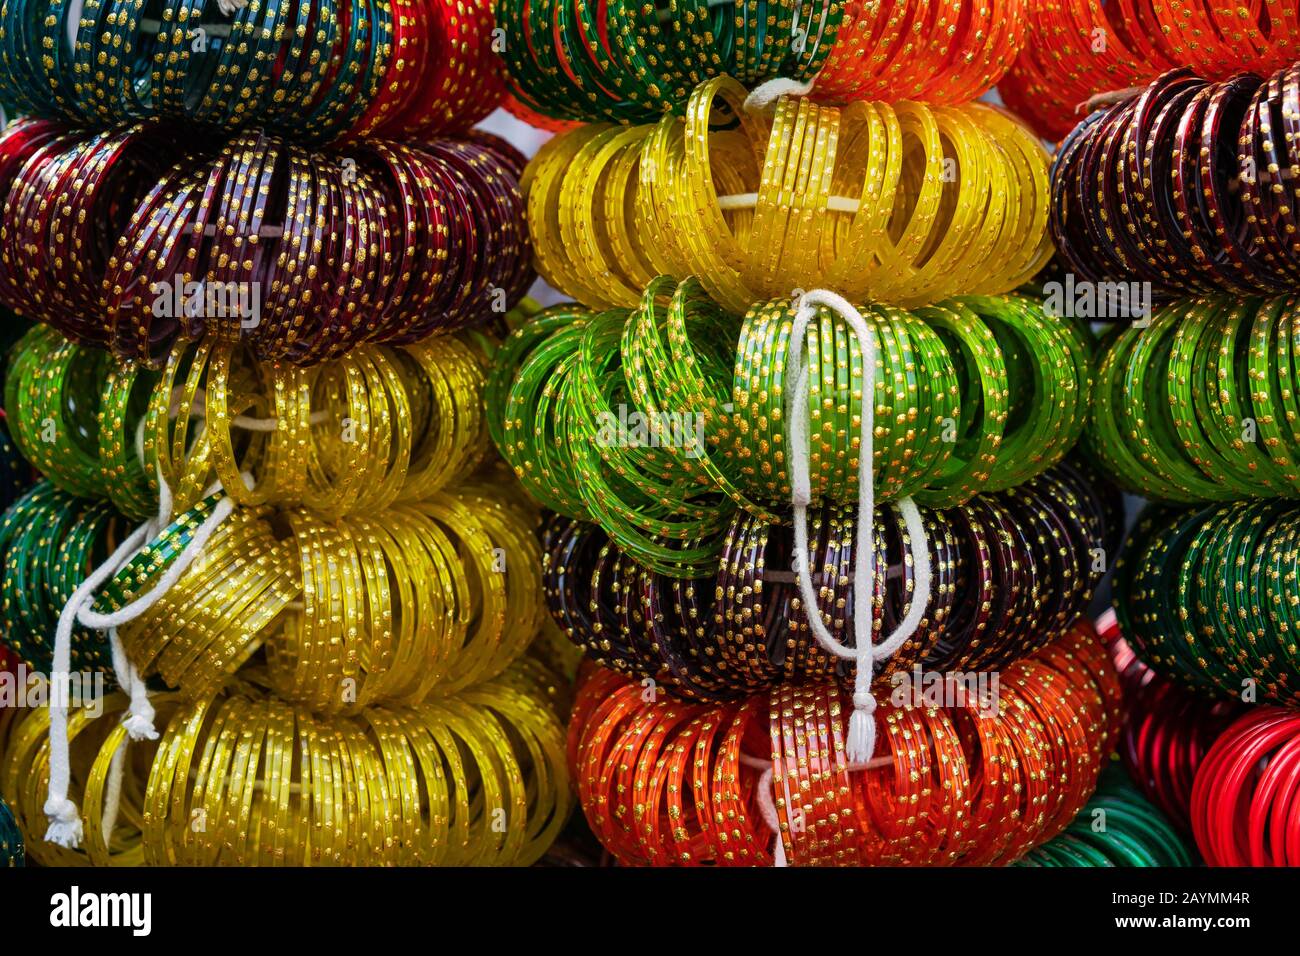 Bunches of Indian glass bangles in bright colors being sold along open street in Udaipur, Rajasthan, India. Stock Photo